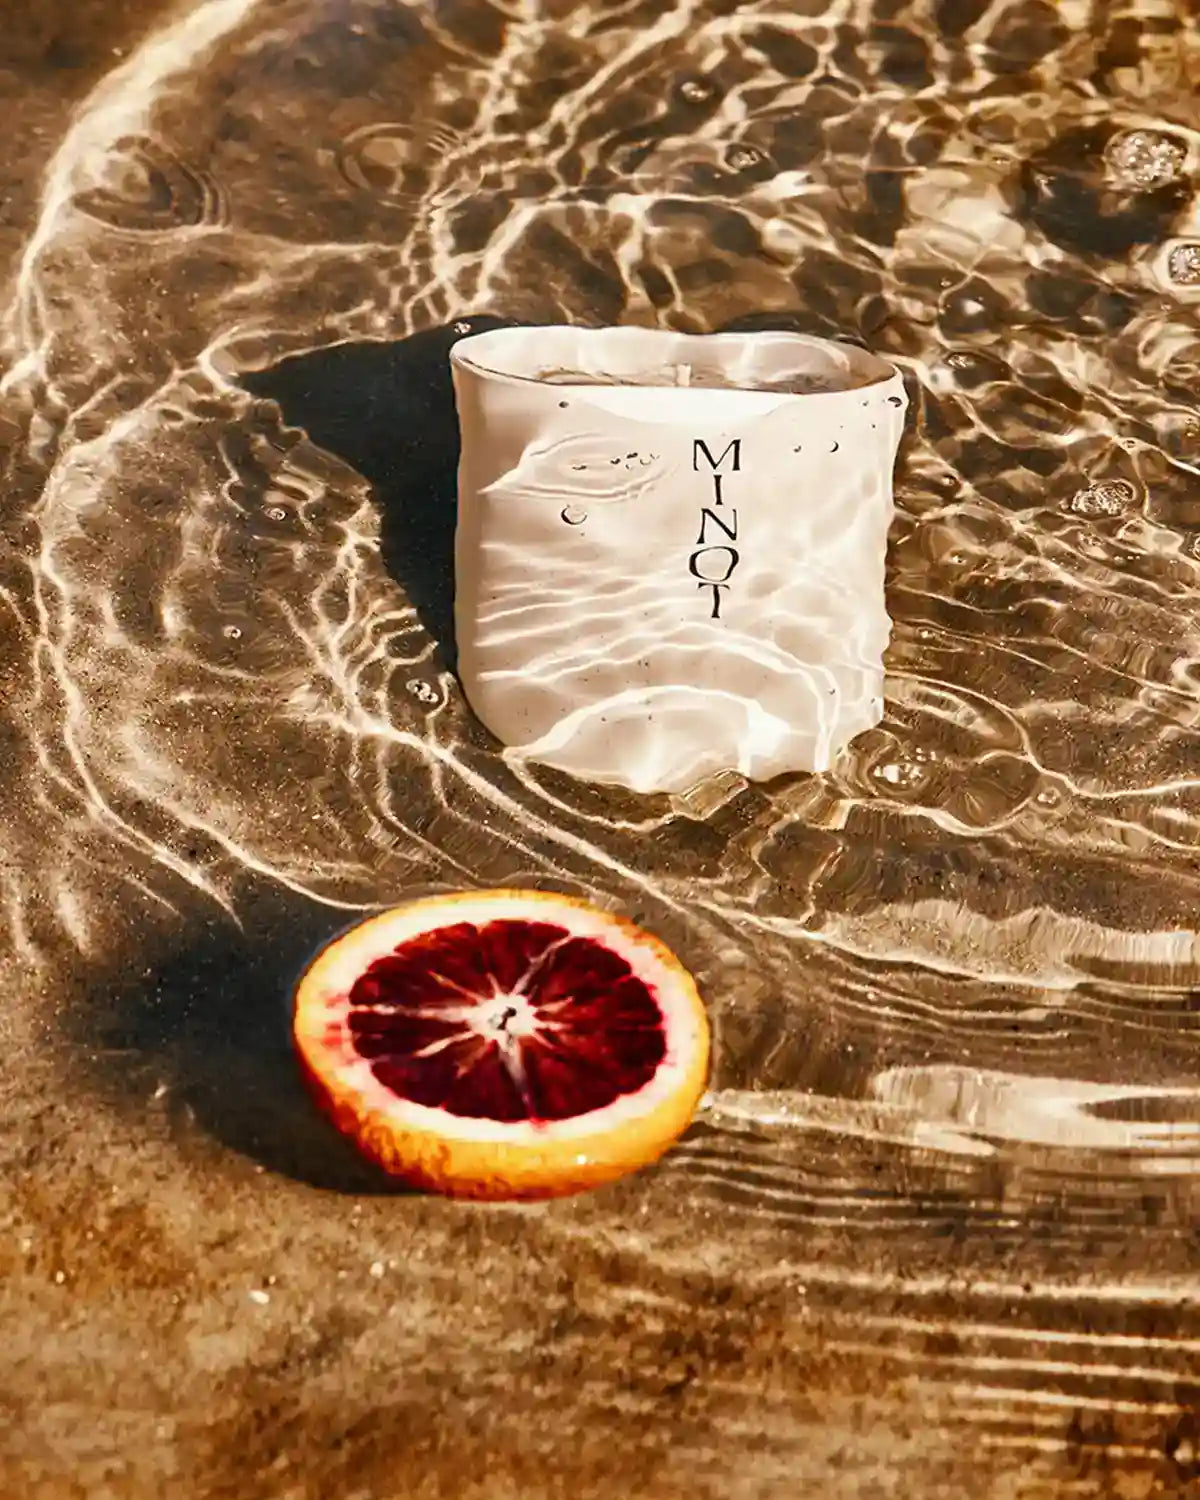 The eco-friendly, non-toxic Luna candle shimmers underwater next to a slice of citrus